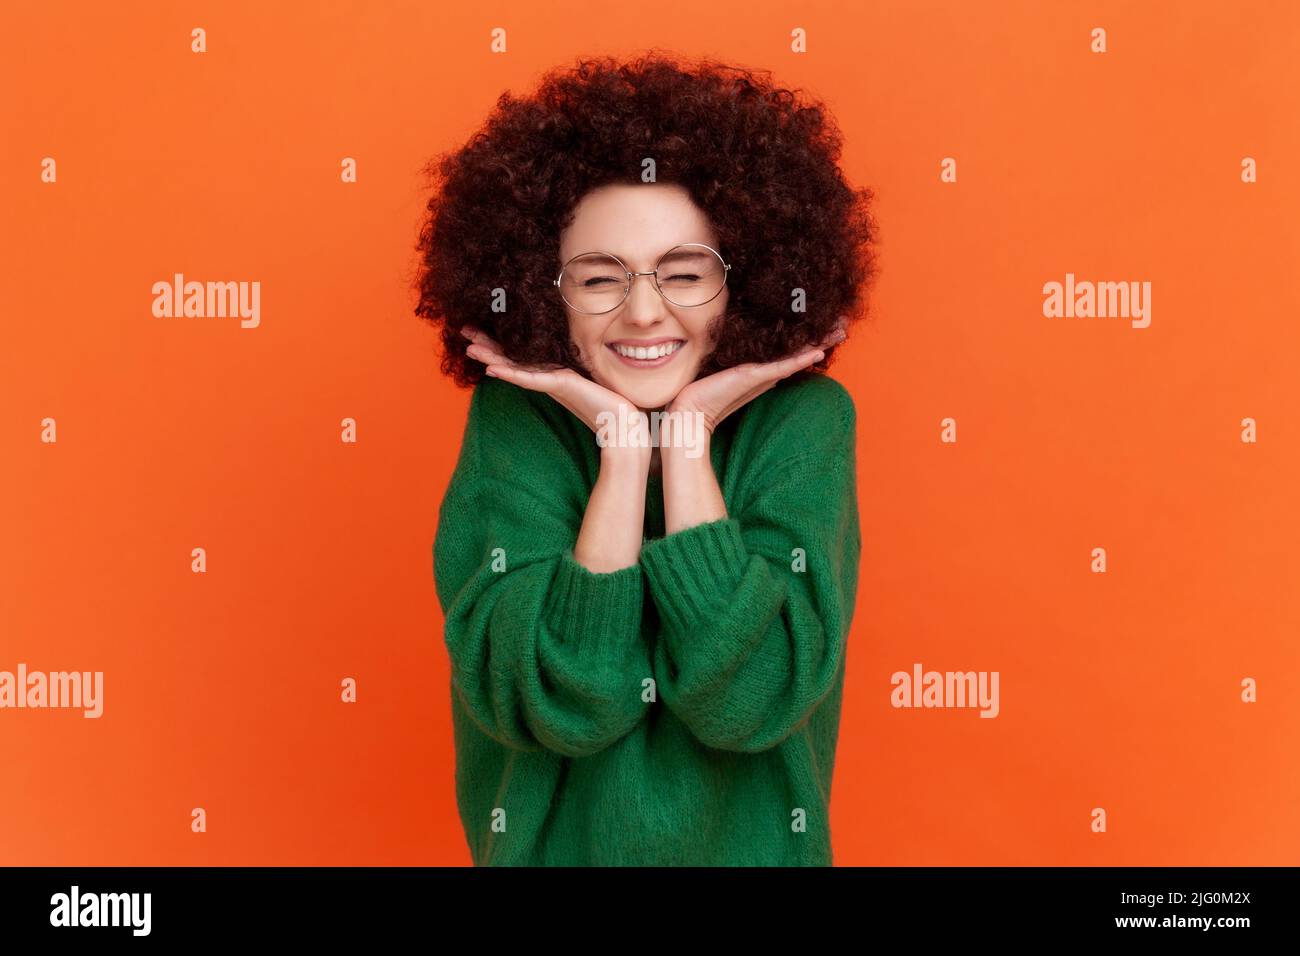 Happy woman with Afro hairstyle wearing green casual style sweater standing with hands under chin, keeping eyes closing, expressing happiness. Indoor studio shot isolated on orange background. Stock Photo